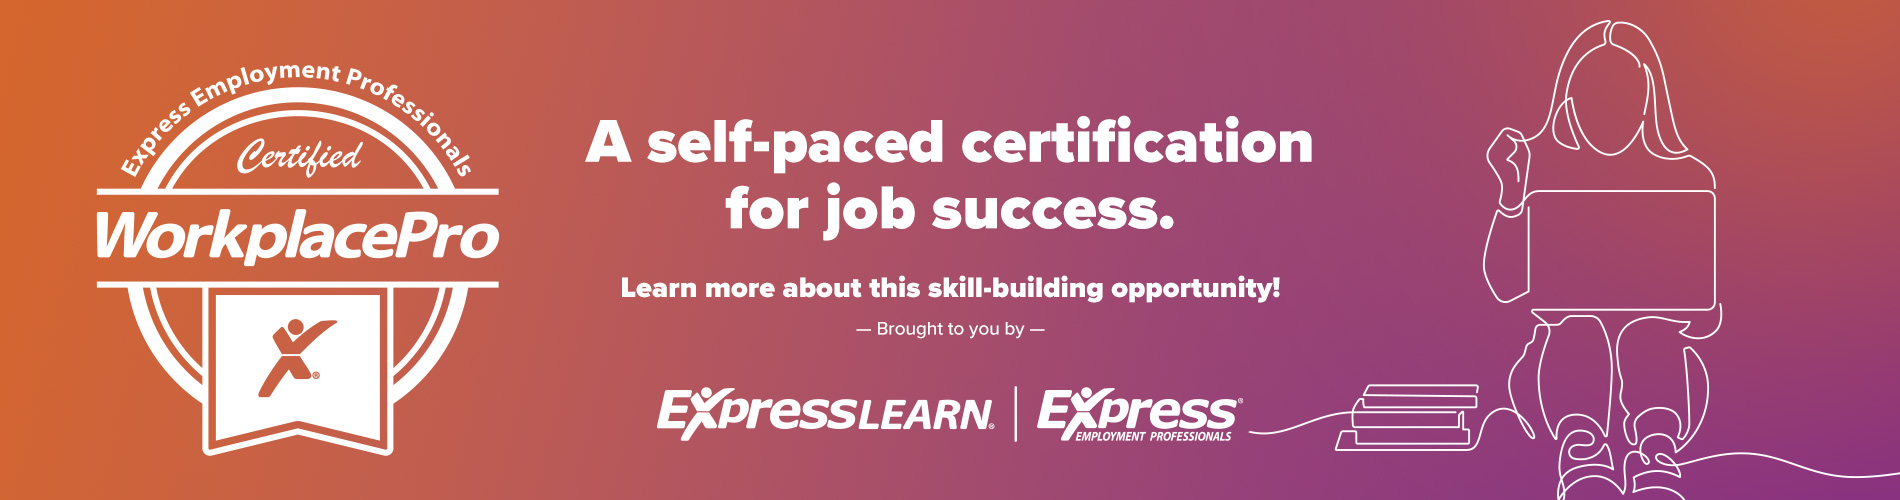 Workplace Pro, A Self Paced Certification for Job Success